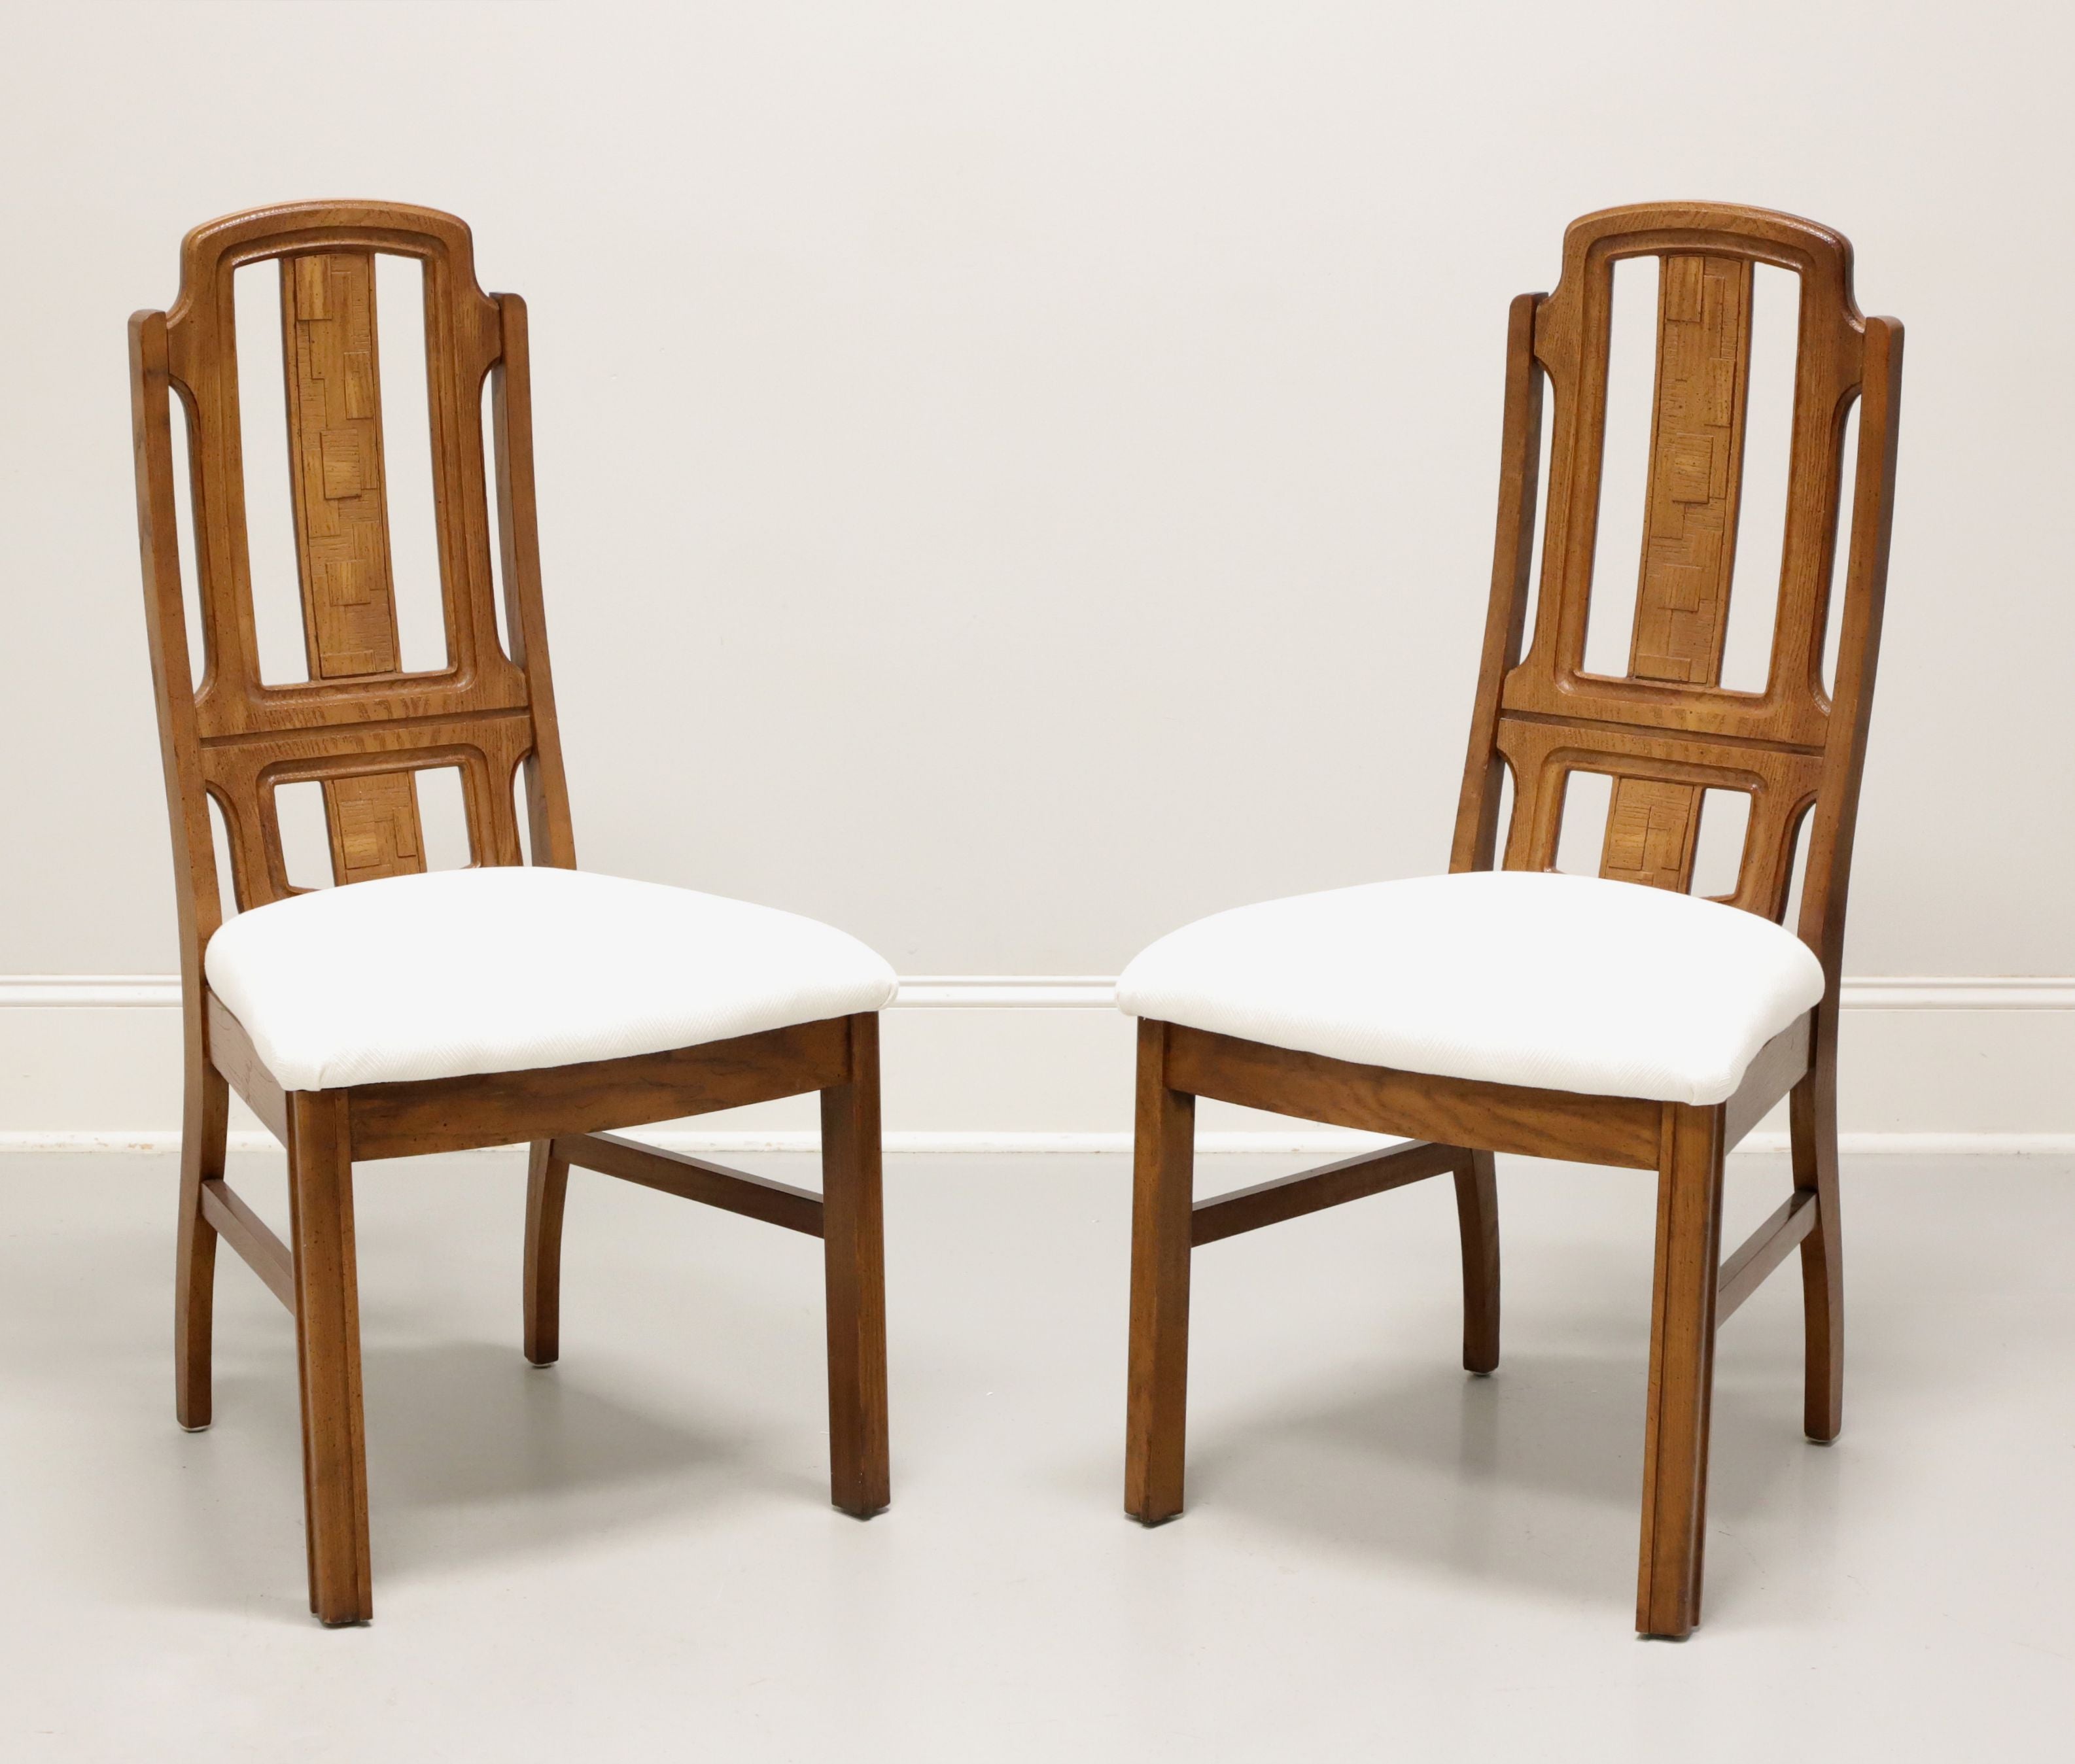 BROYHILL PREMIER Mid 20th Century Oak Brutalist Style Dining Side Chairs -Pair B For Sale 5